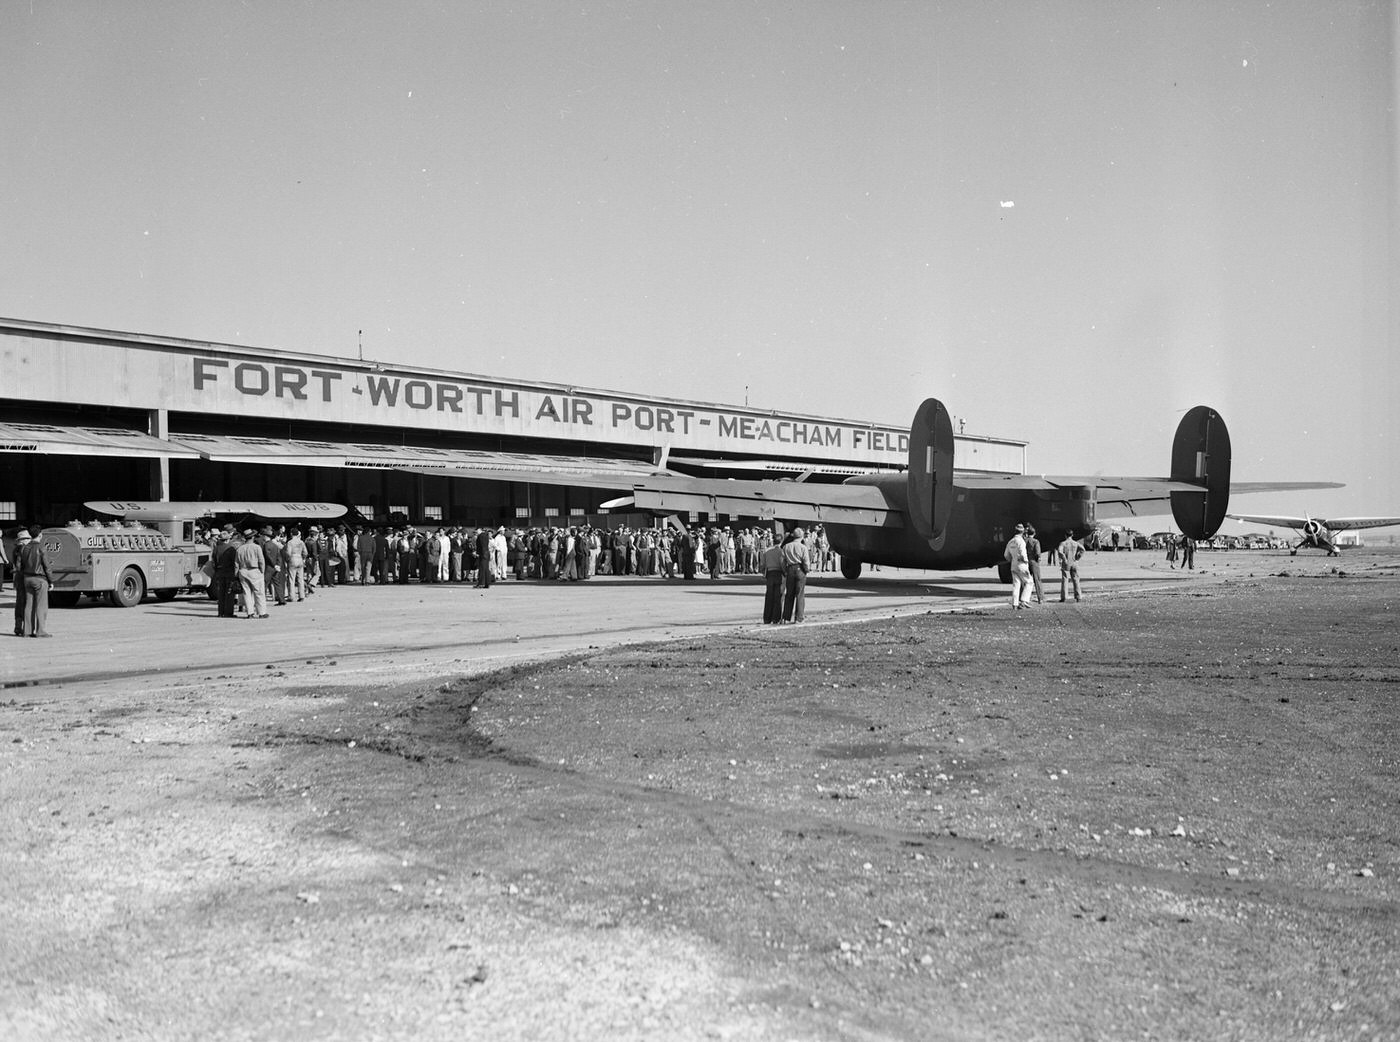 Crowd around Consolidated Aircraft 30-ton land bomber at Meacham Field, Fort Worth, Texas, 1941